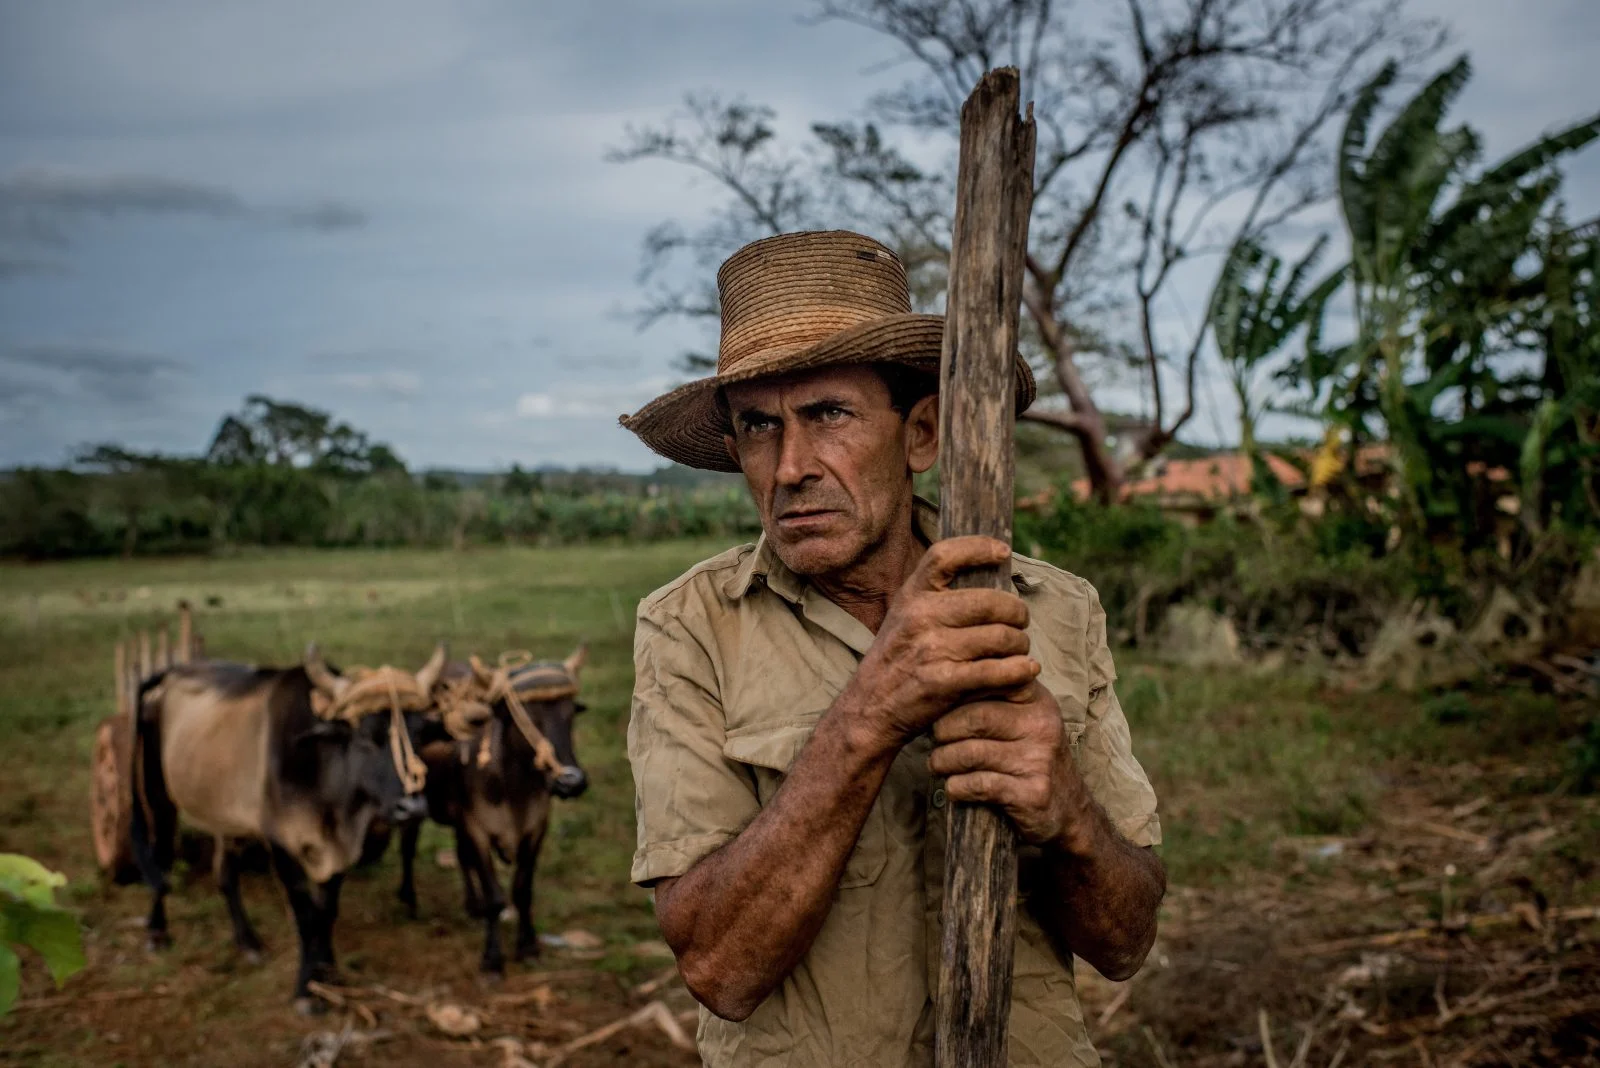 A farmer approached foreigners to offer them a tour on horseback in the countryside near Vinales, Cuba on January 25, 2016.